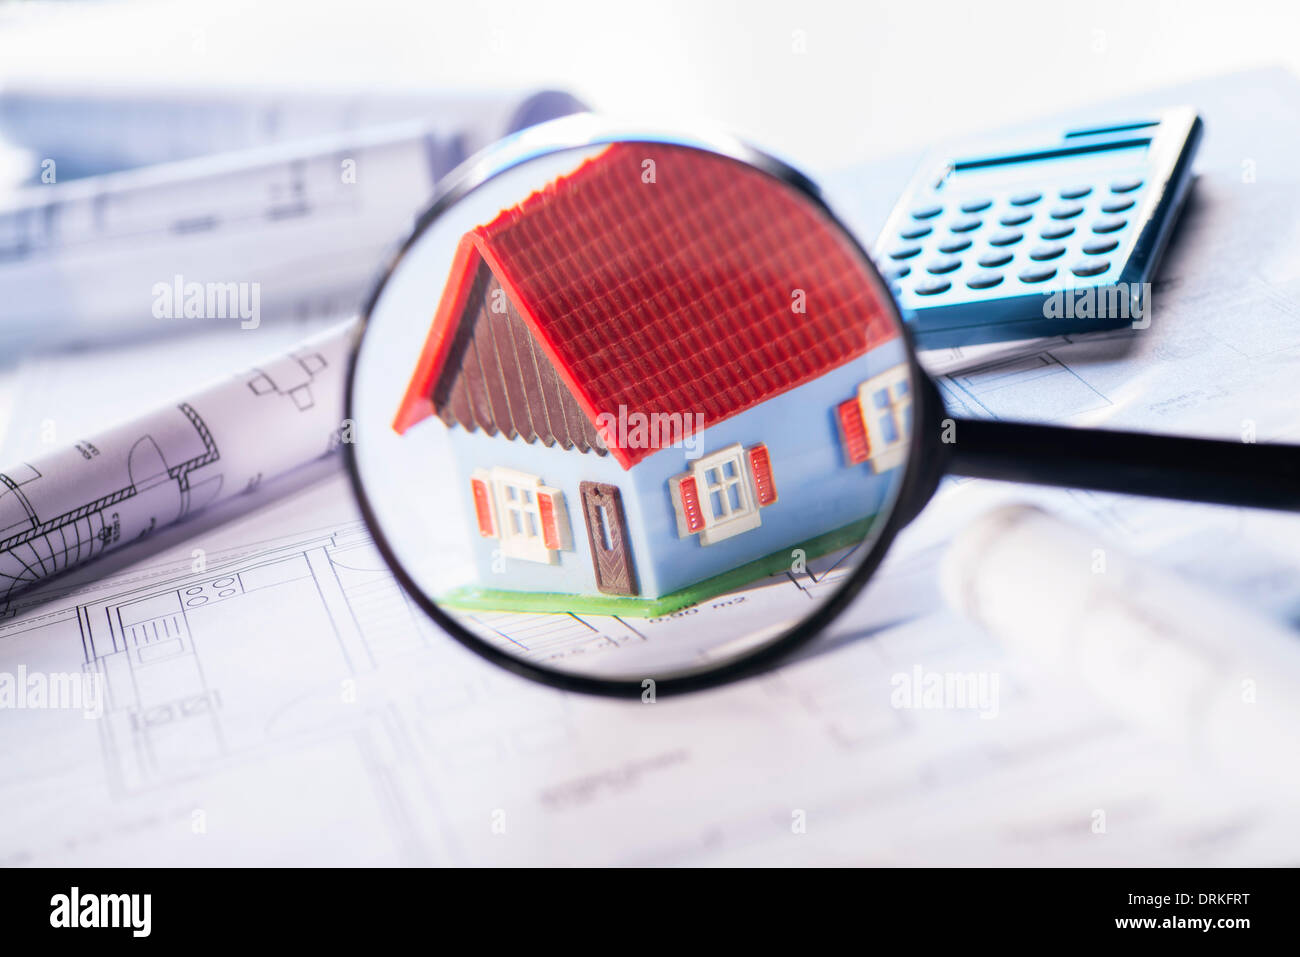 Architectural model is focused with a magnifying glass. In the background construction plans and a calculator can be seen. Stock Photo